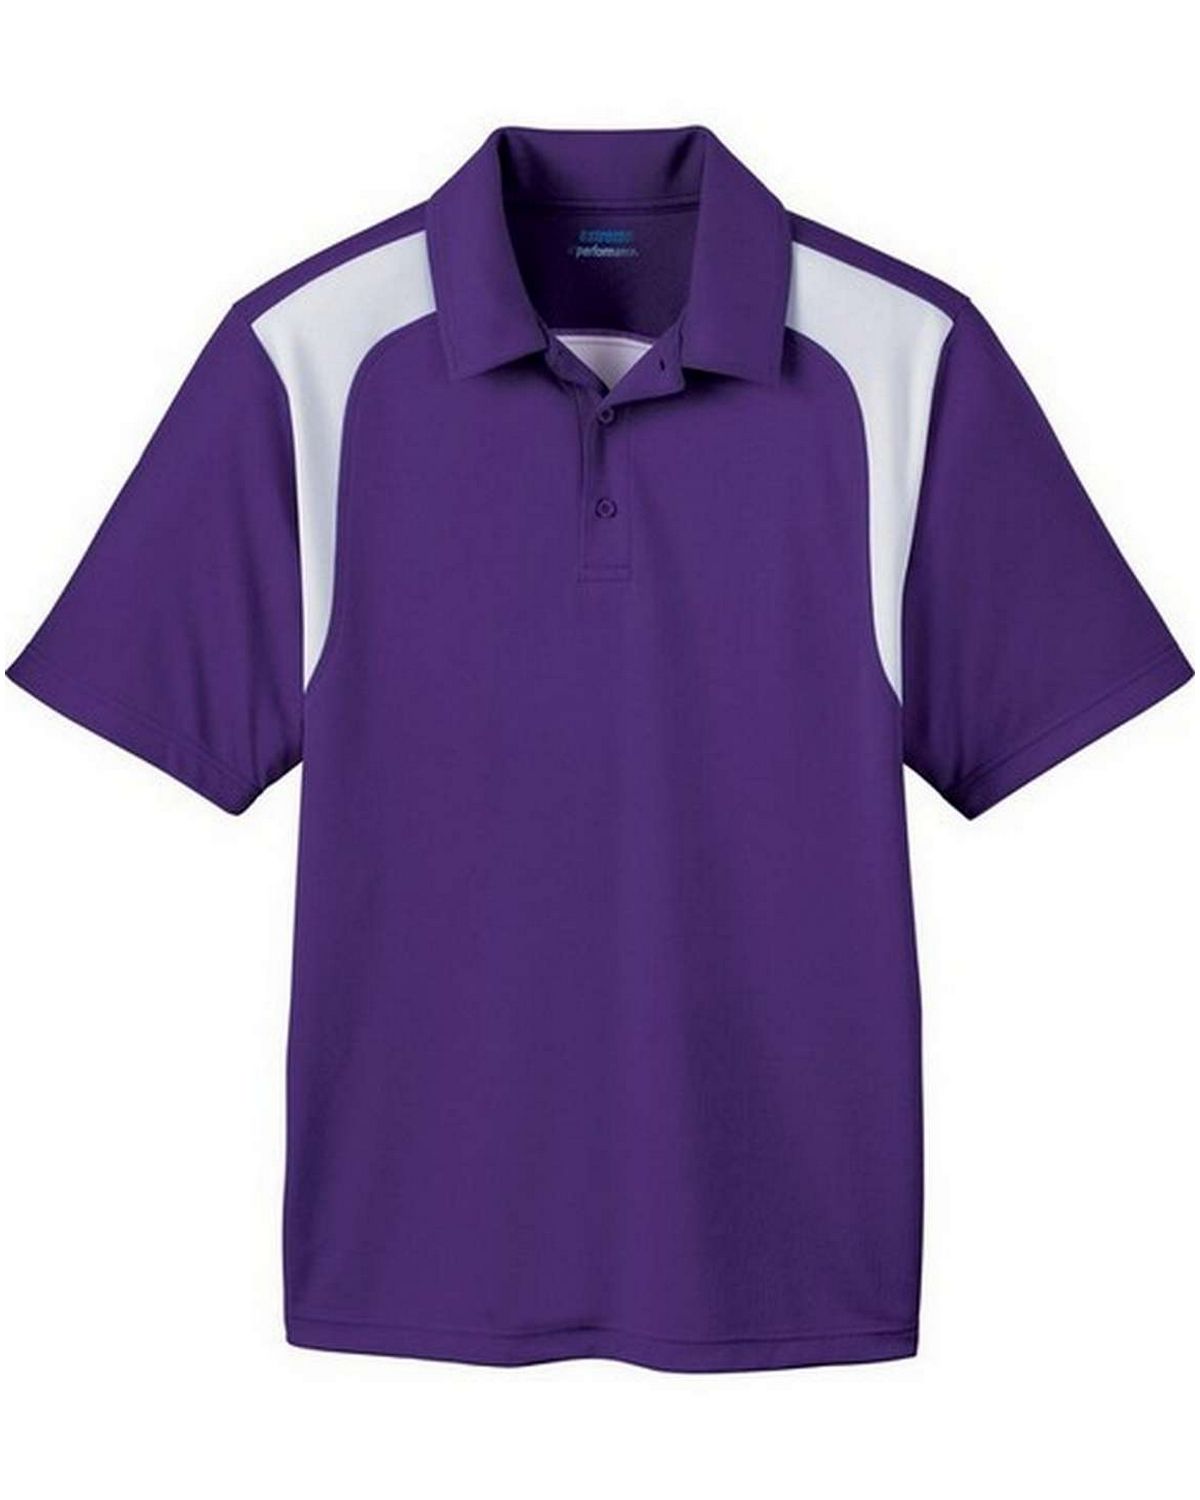 Extreme 85105 Mens Eperformance Color Block Textured Polo